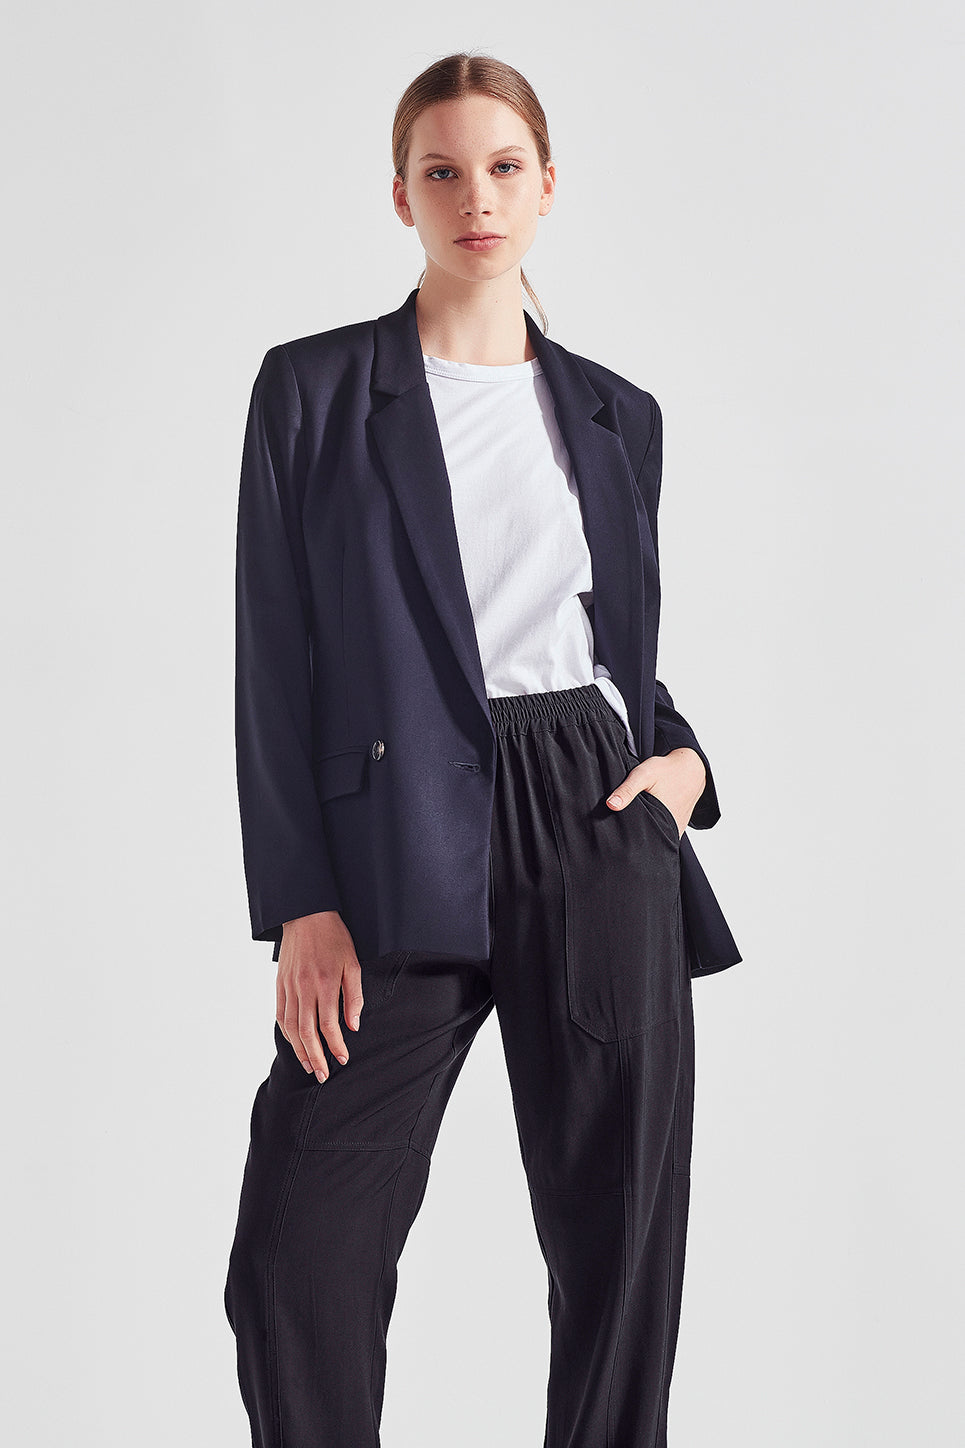 The Dorset Pant in Navy